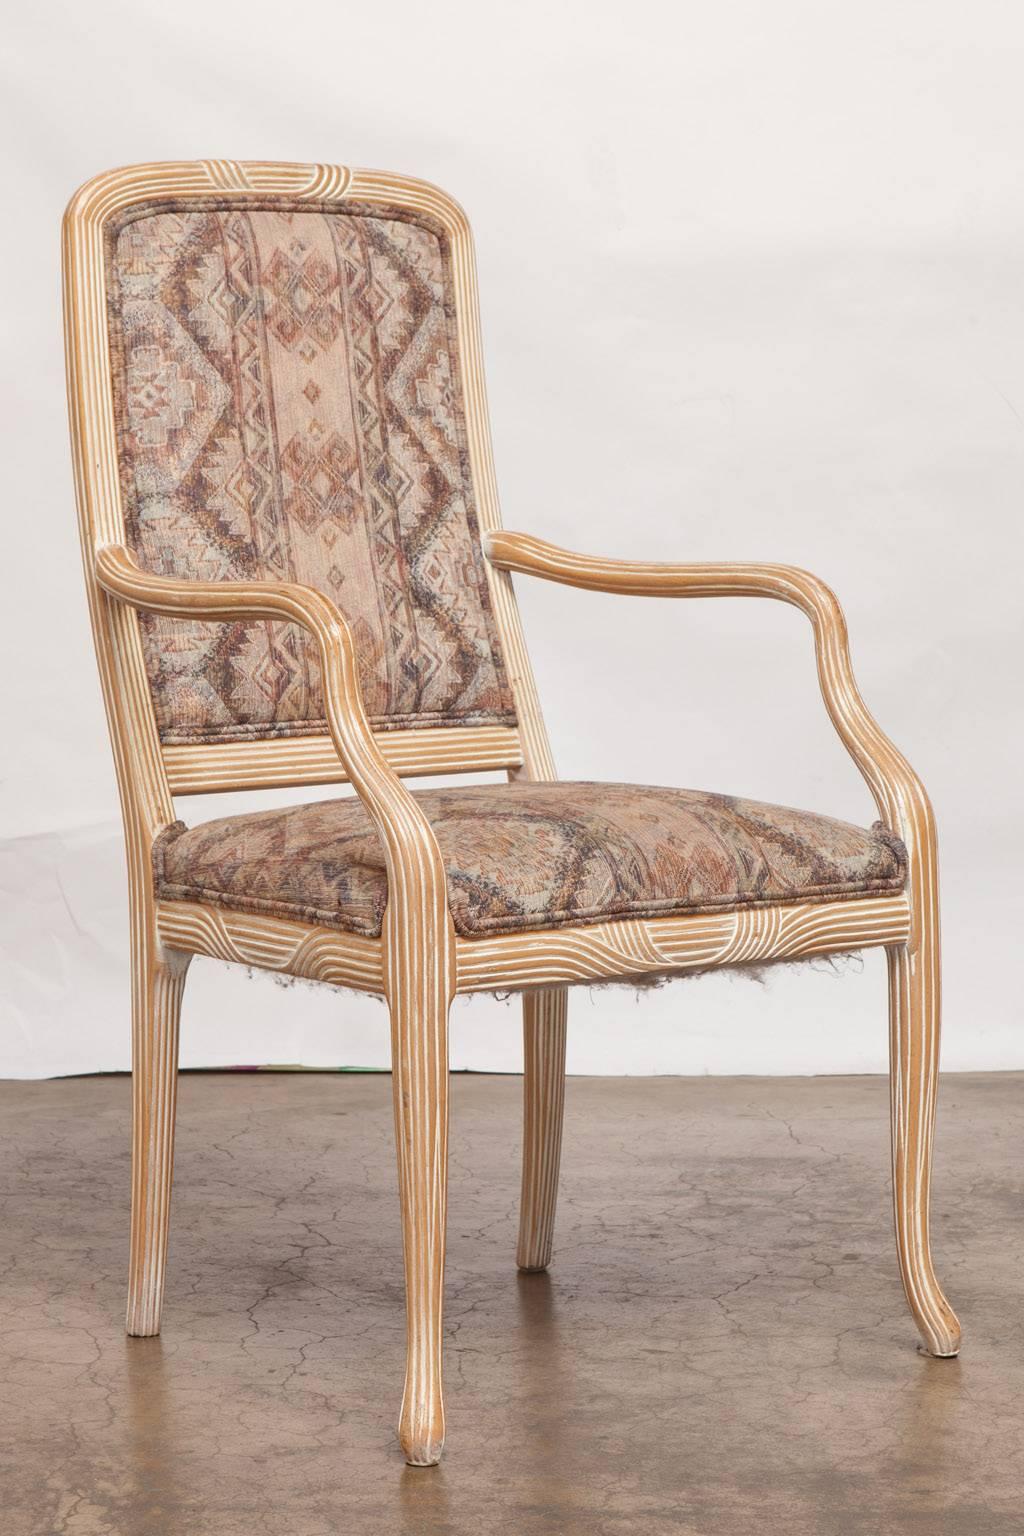 Unique set of dining armchairs featuring a cerused whitewash oak finish on a reeded frame. The carved frames have graceful curved arms with a natural form. The chairs are supported by reeded splayed legs. Original 1980s upholstery could be updated